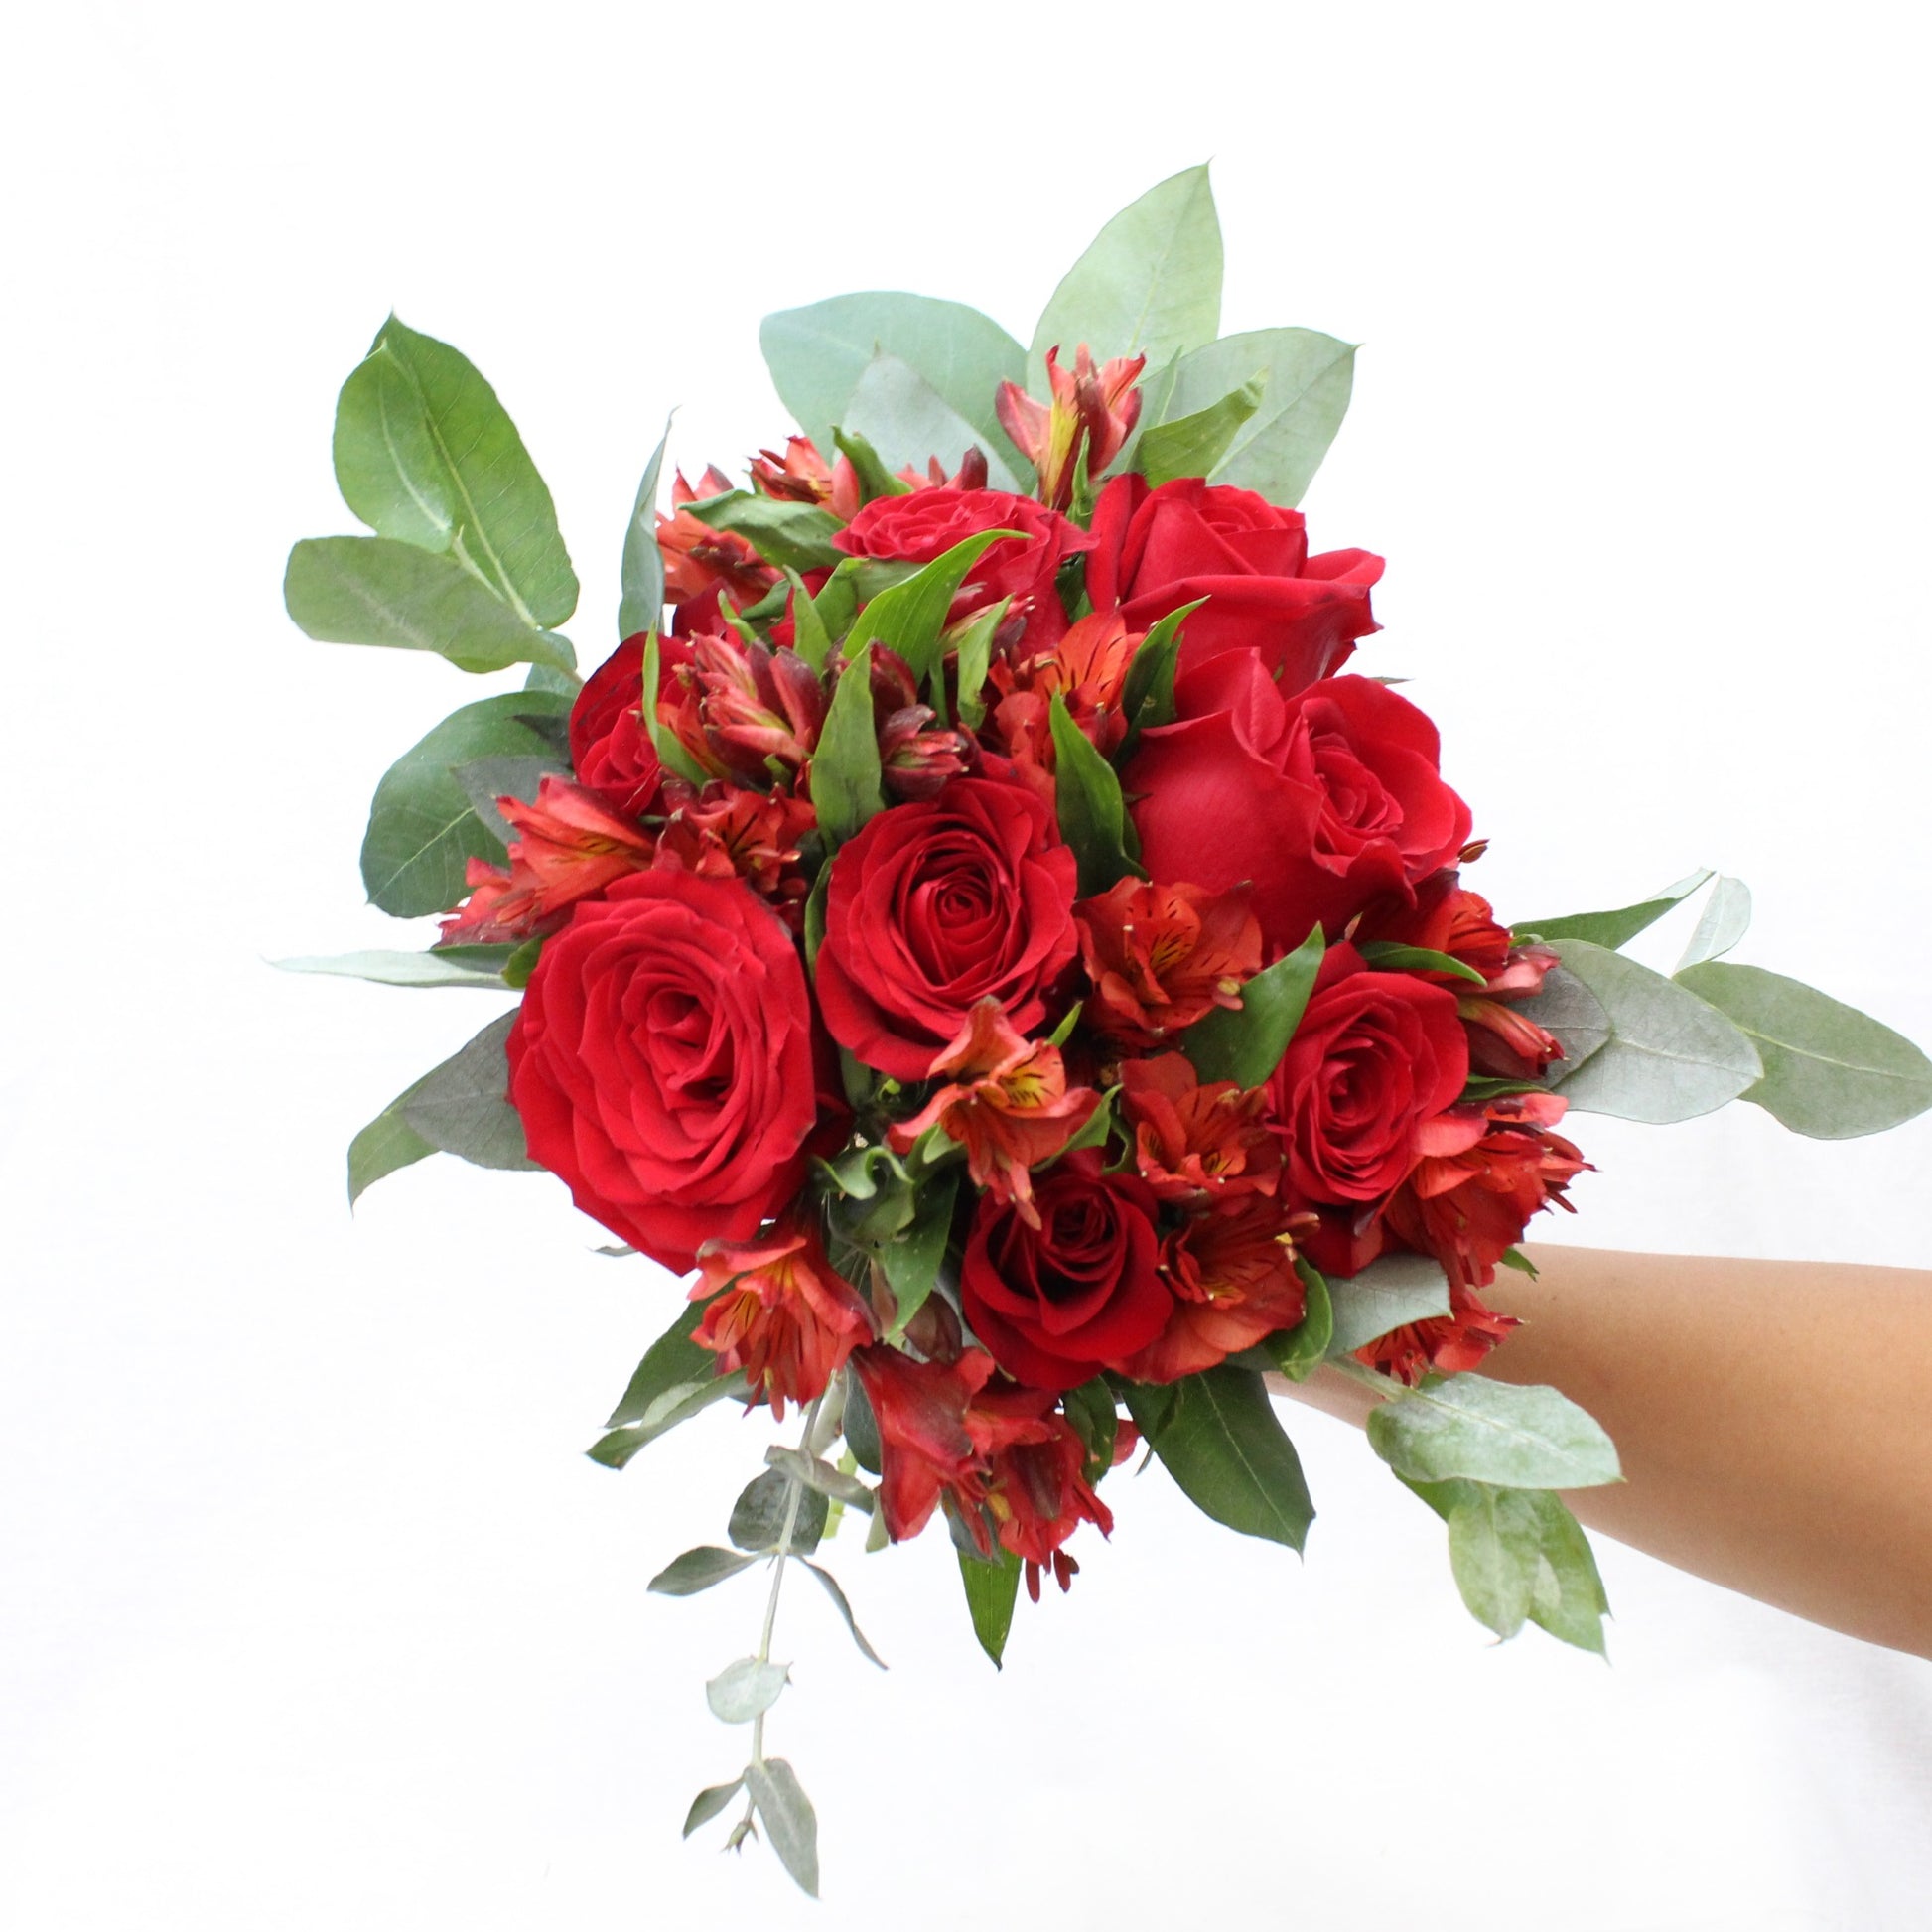 Lady in Red - Ramona Floristería 💐